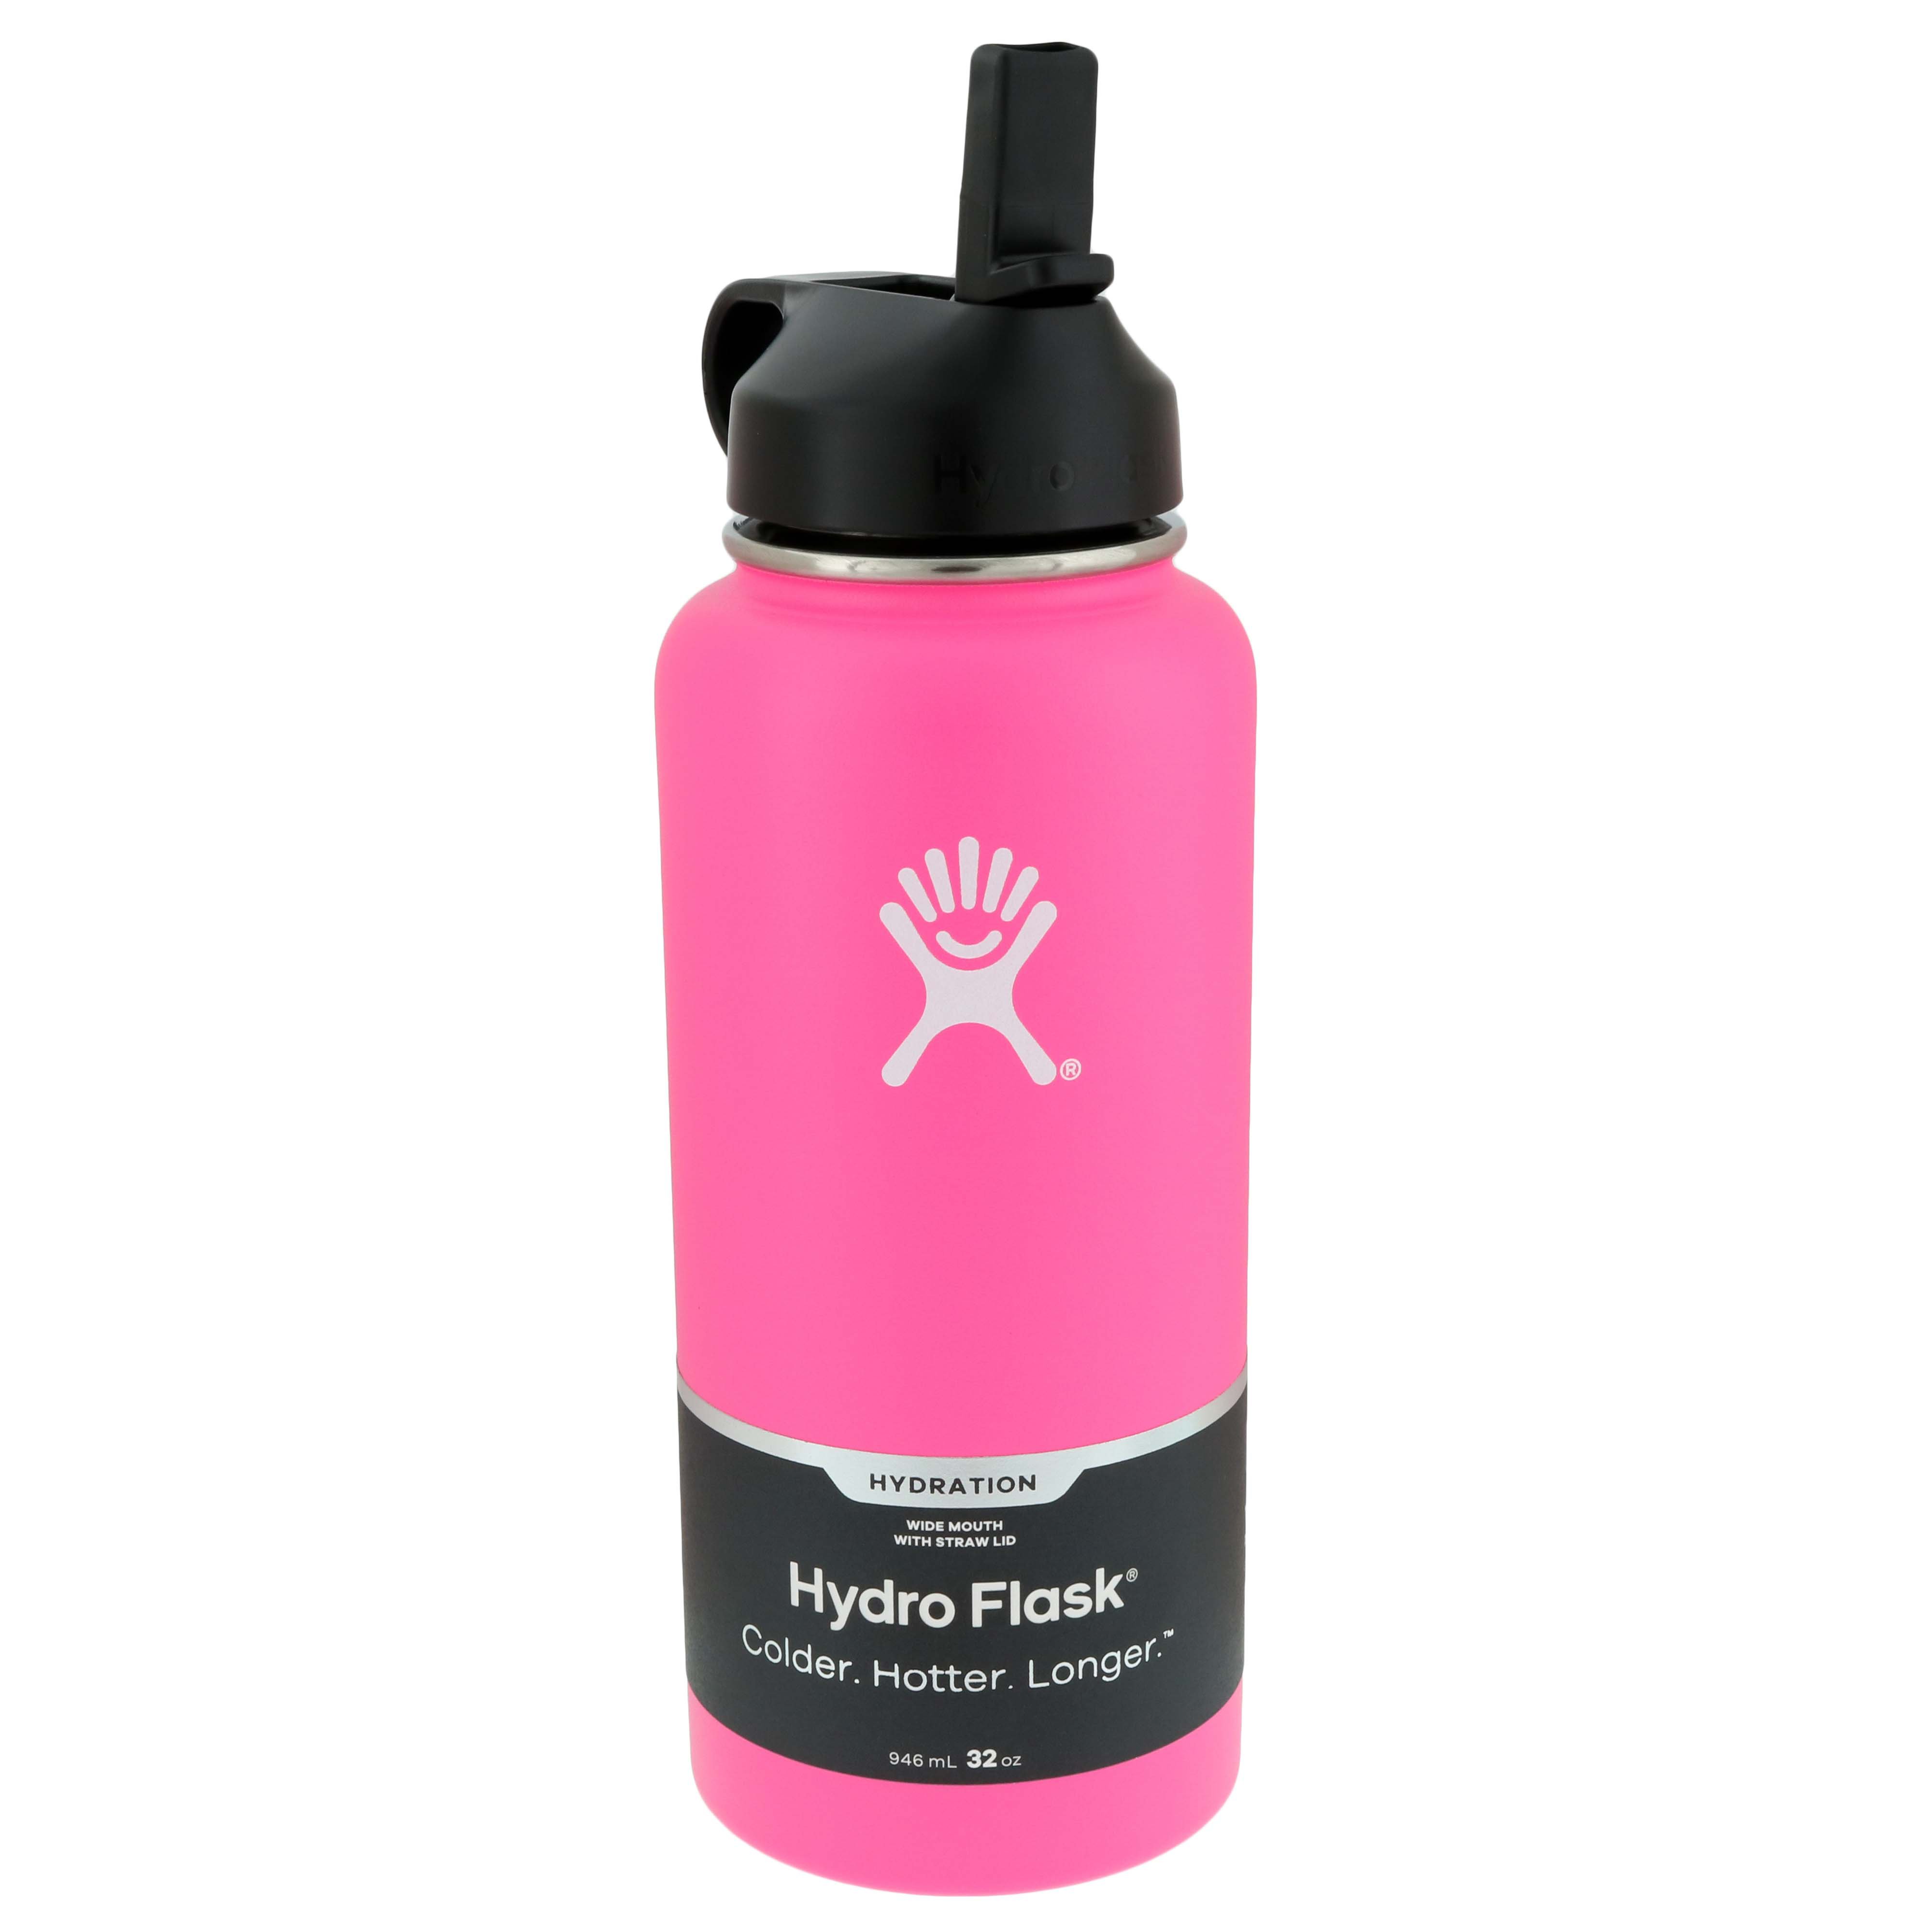 hydro flask what is it made of